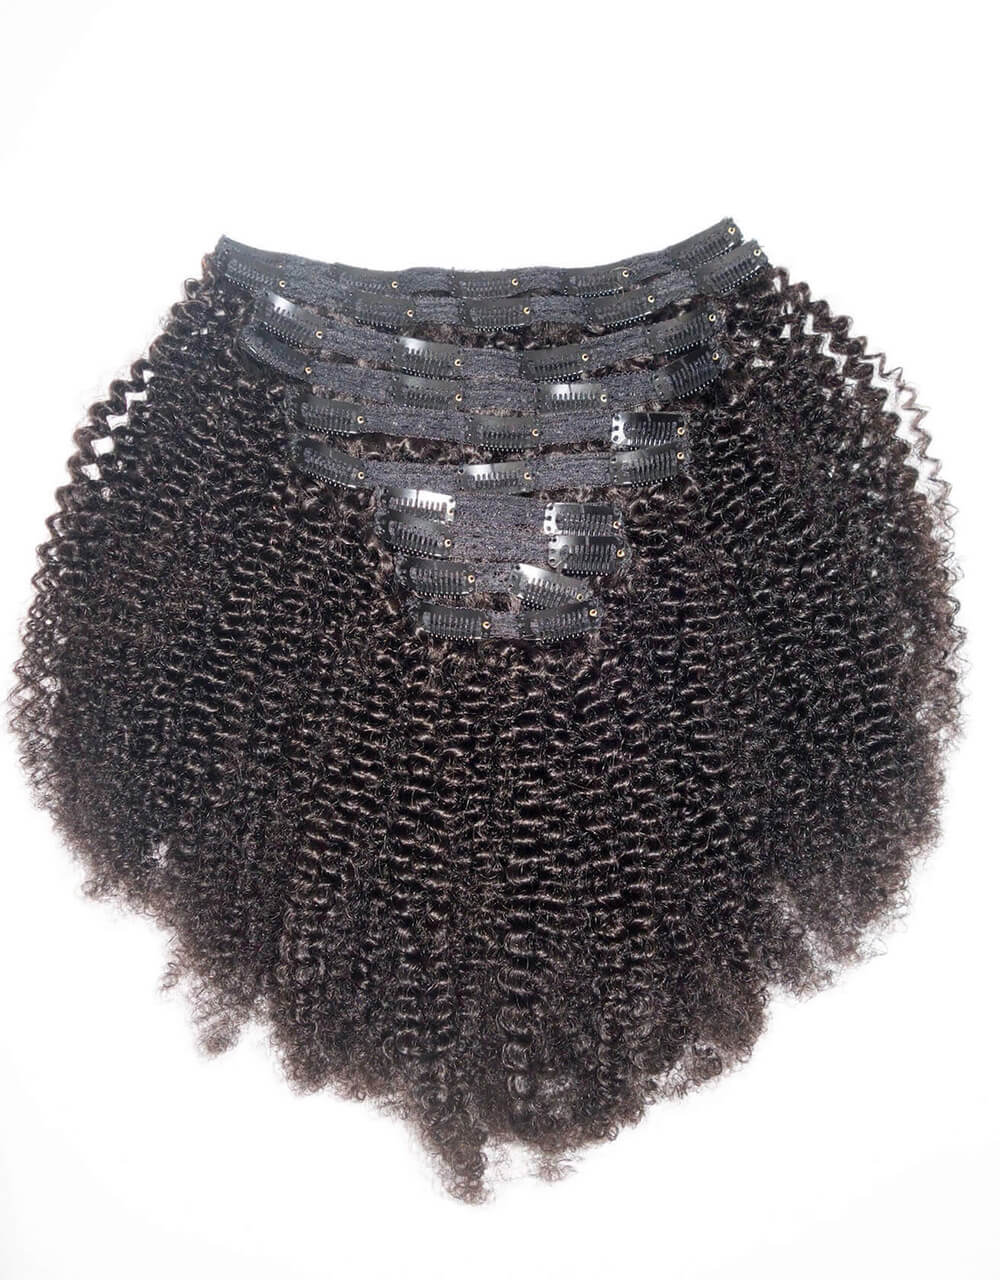 Clip in Hair Extension Afro Kinky Curly Clip-In Set